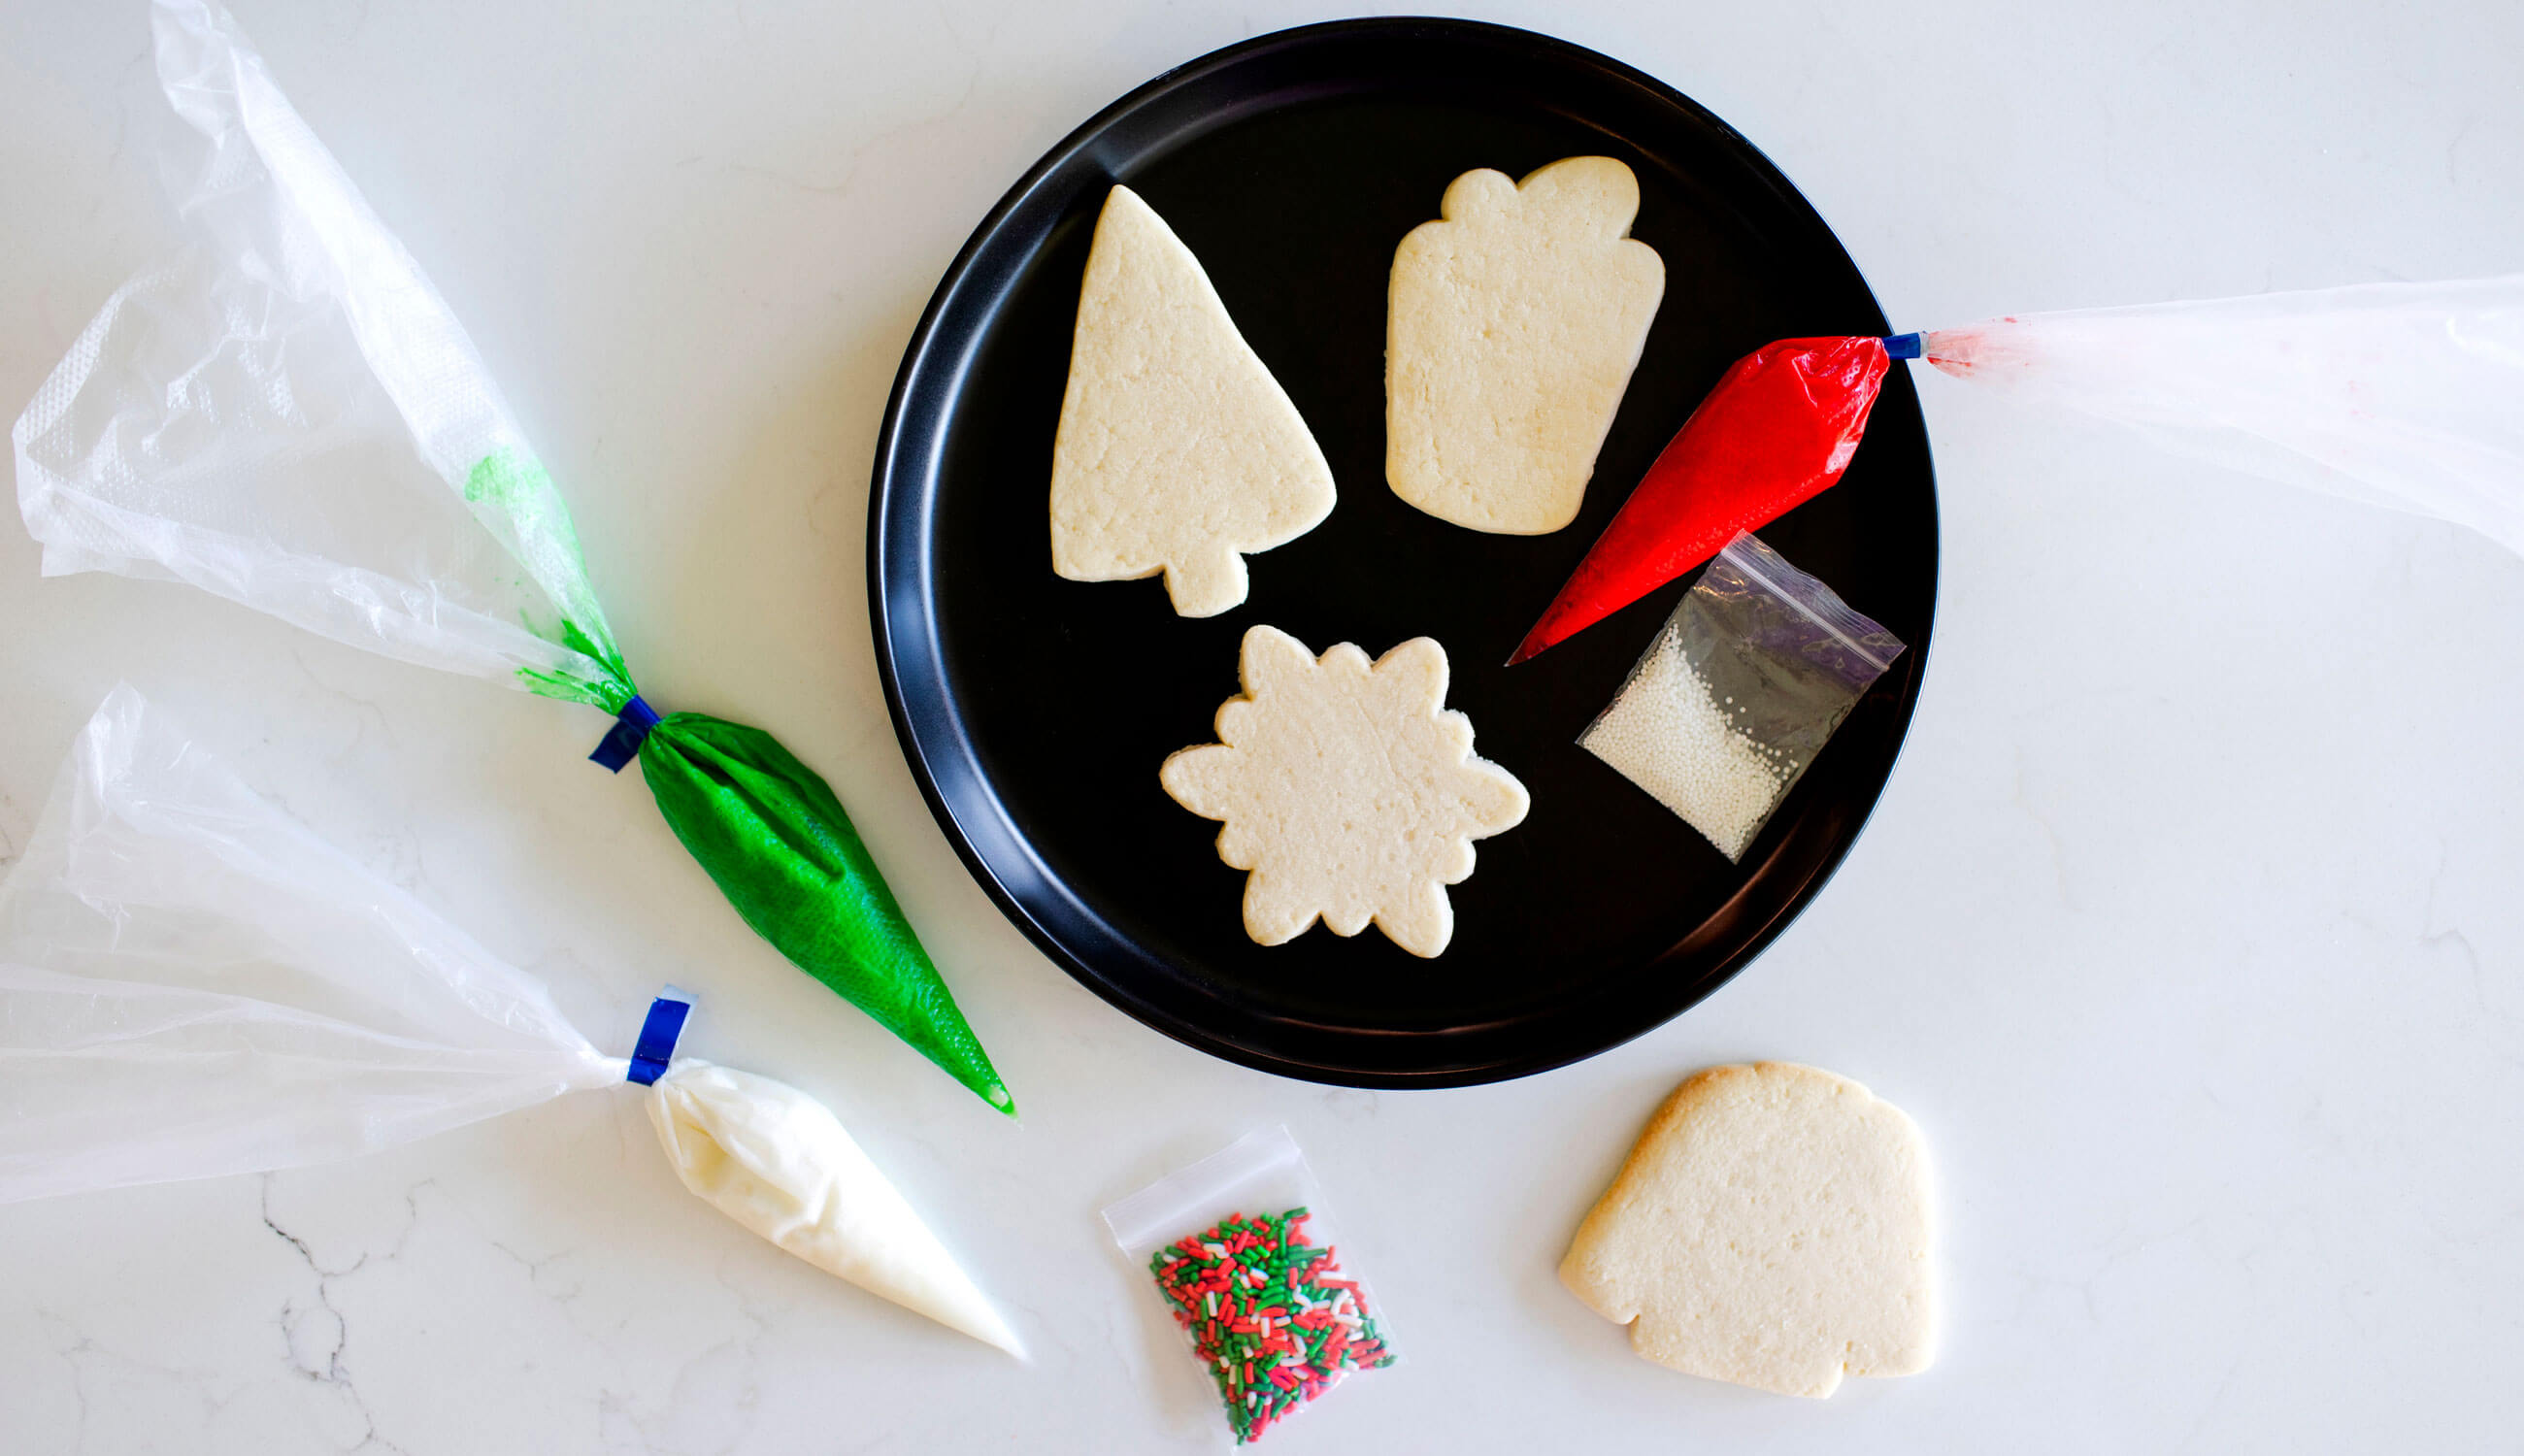 Decorate cookies on your own with our pre-recorded classes